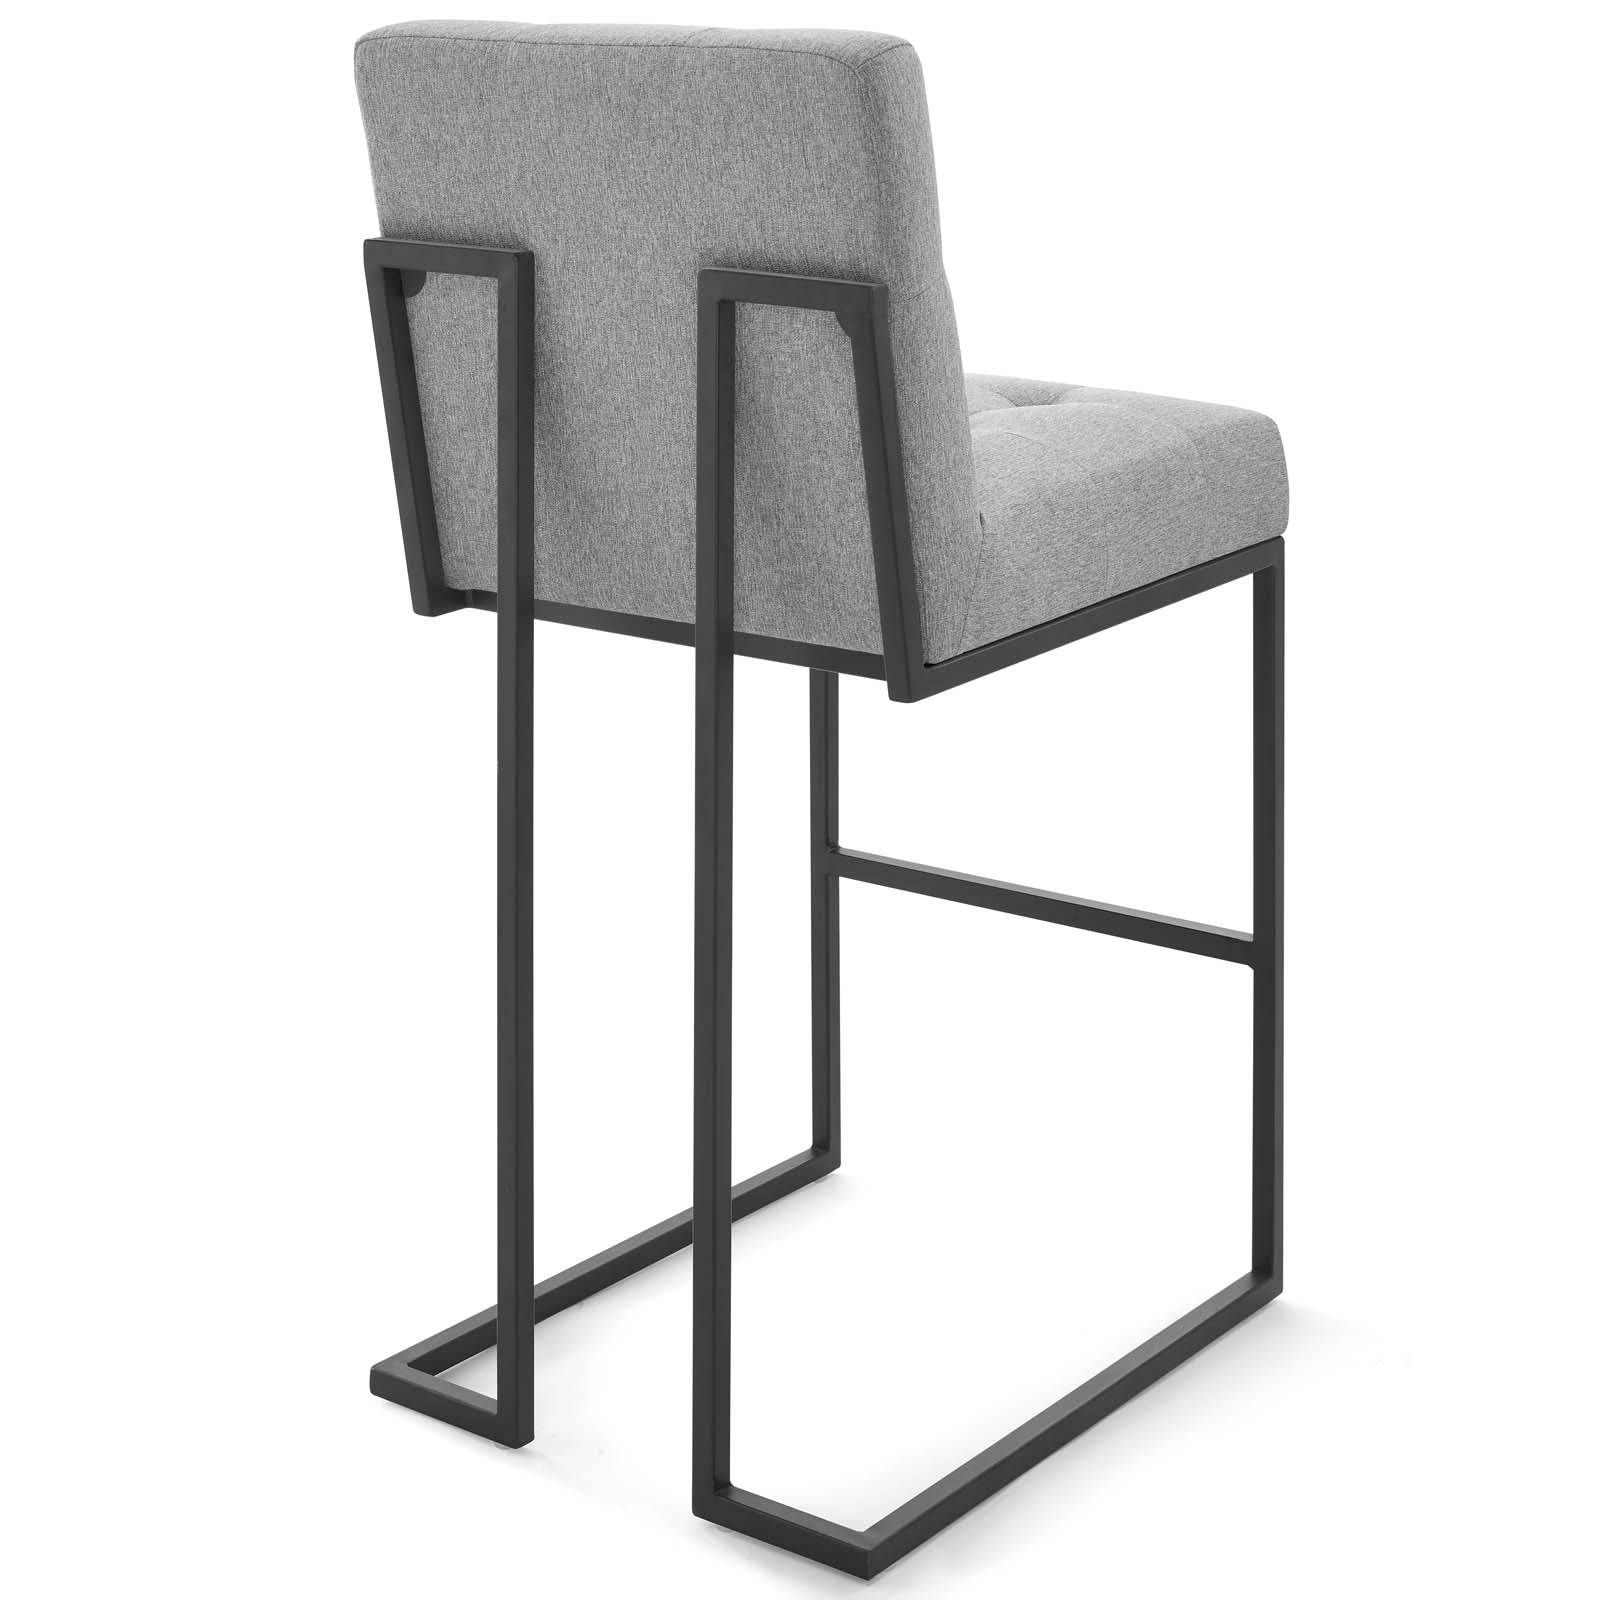 Privy Black Stainless Steel Upholstered Fabric Bar Stool-Bar Stool-Modway-Wall2Wall Furnishings